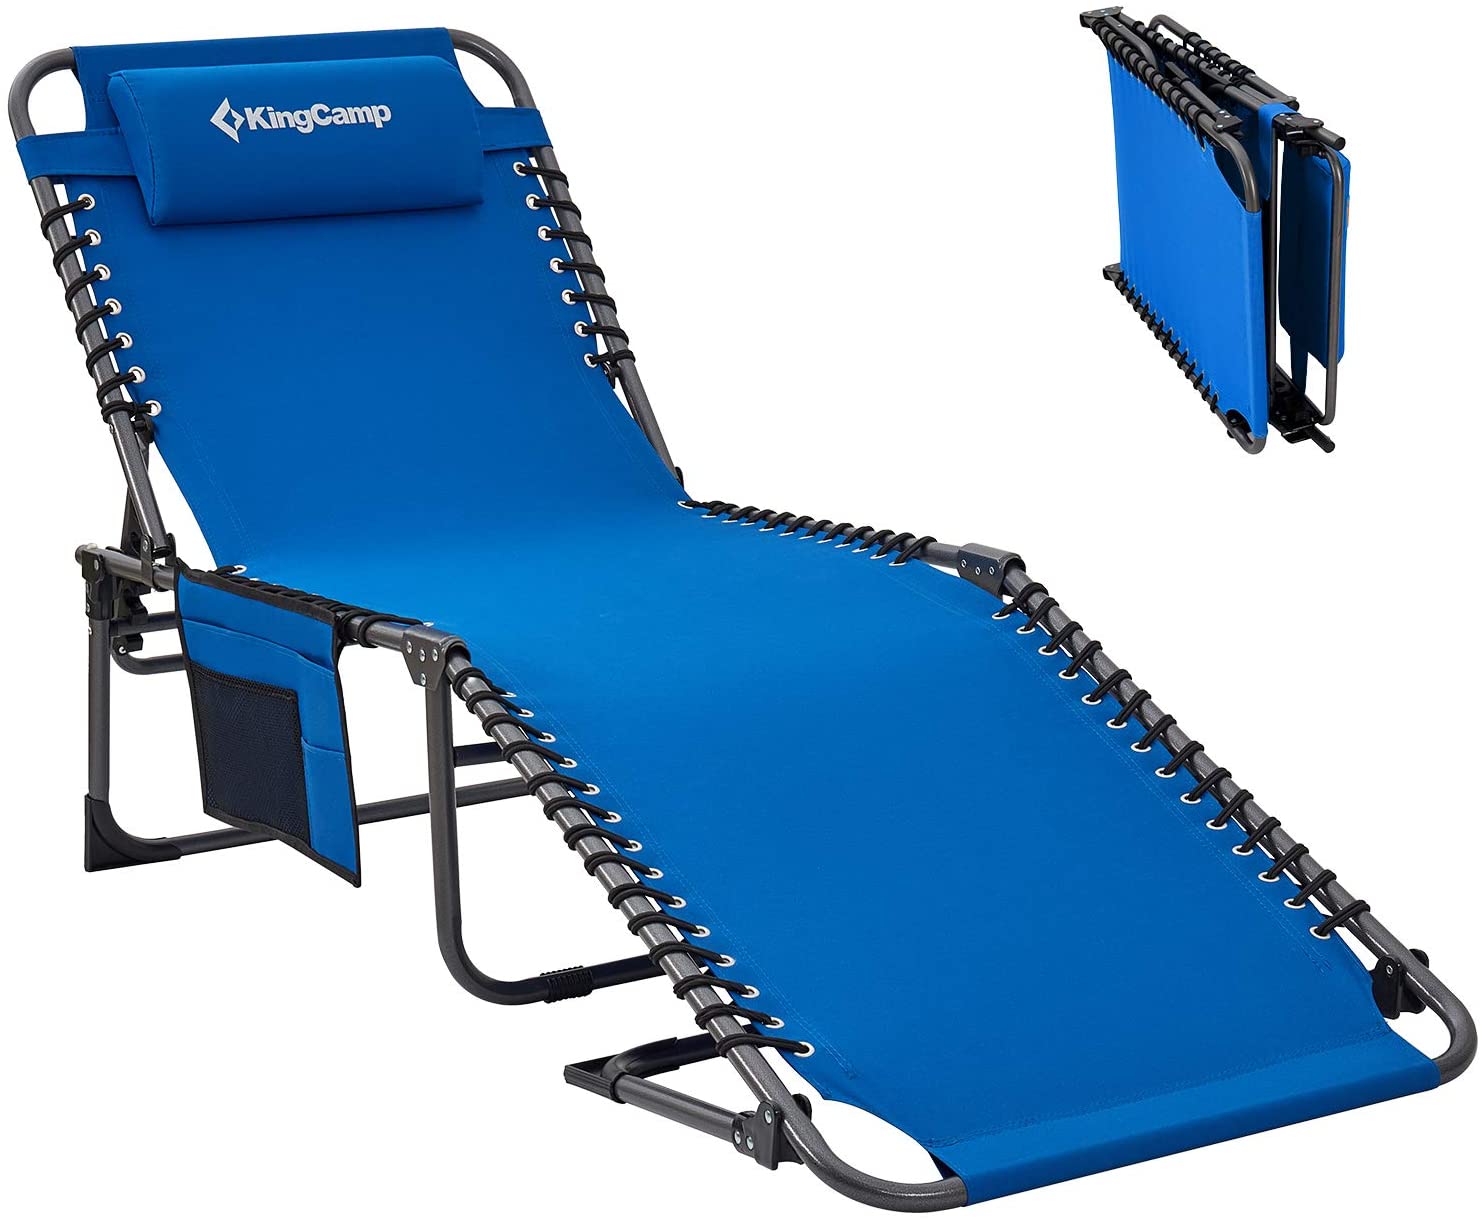 Top 10 Best Beach Lounge Chairs in 2022Top Best Pro Reviews